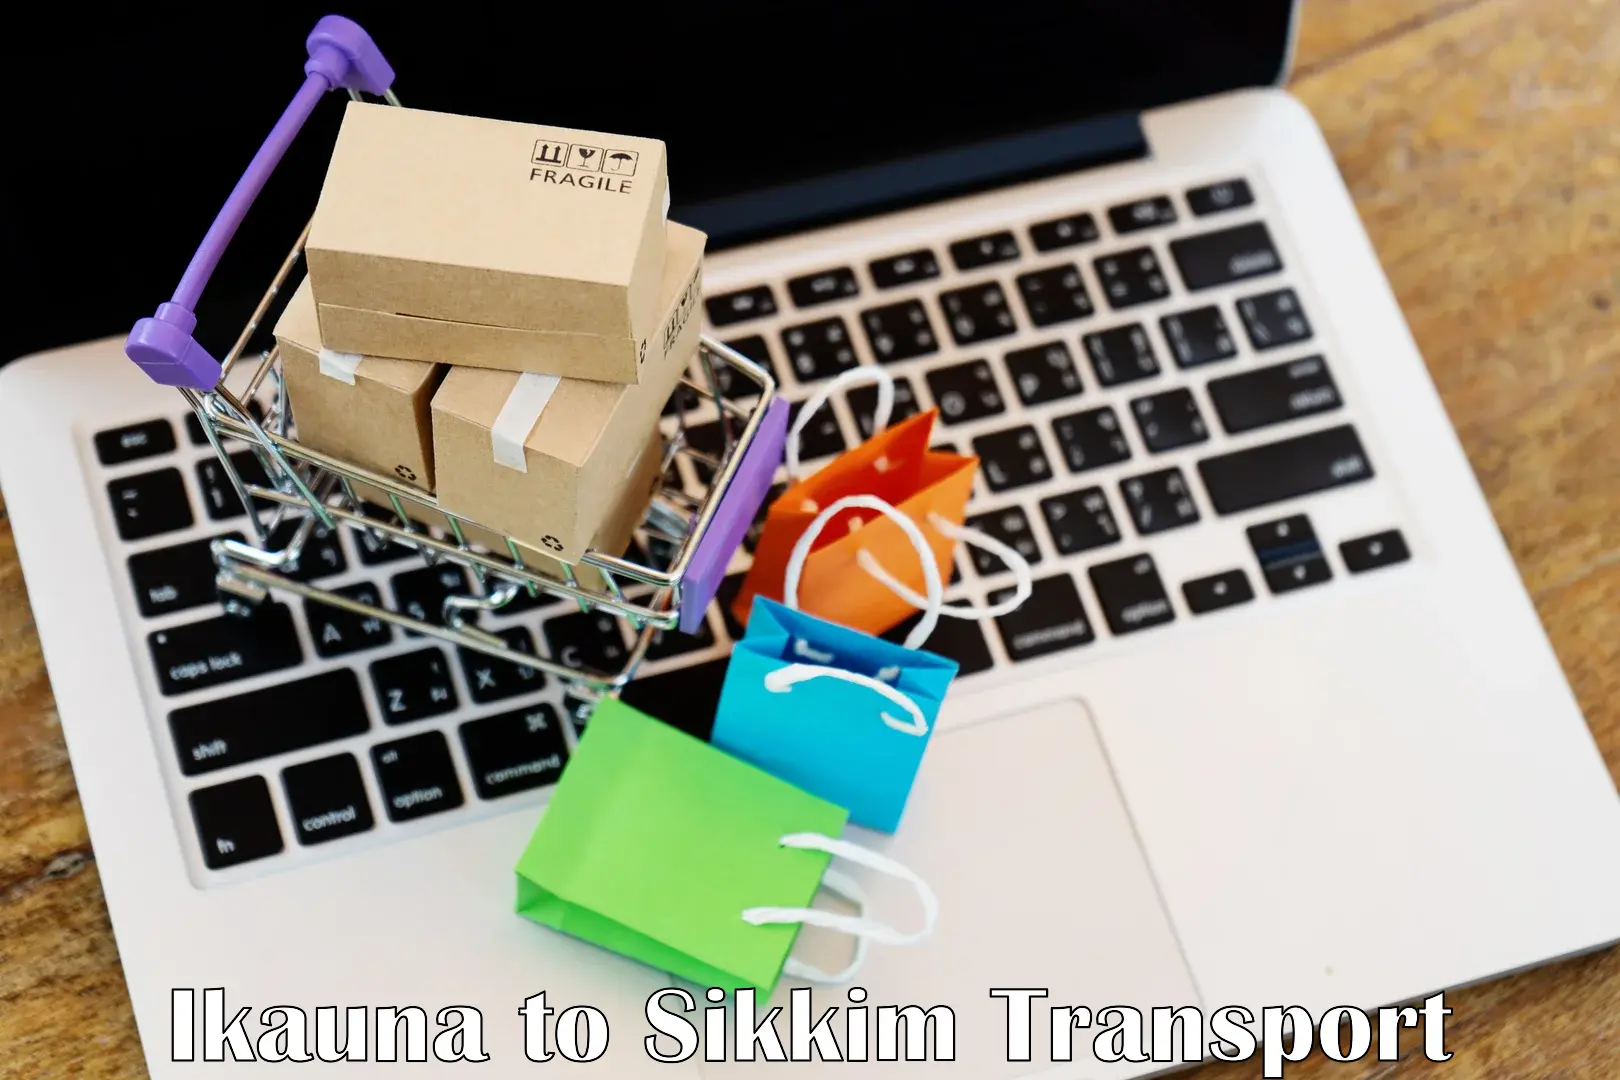 Road transport online services in Ikauna to Pelling